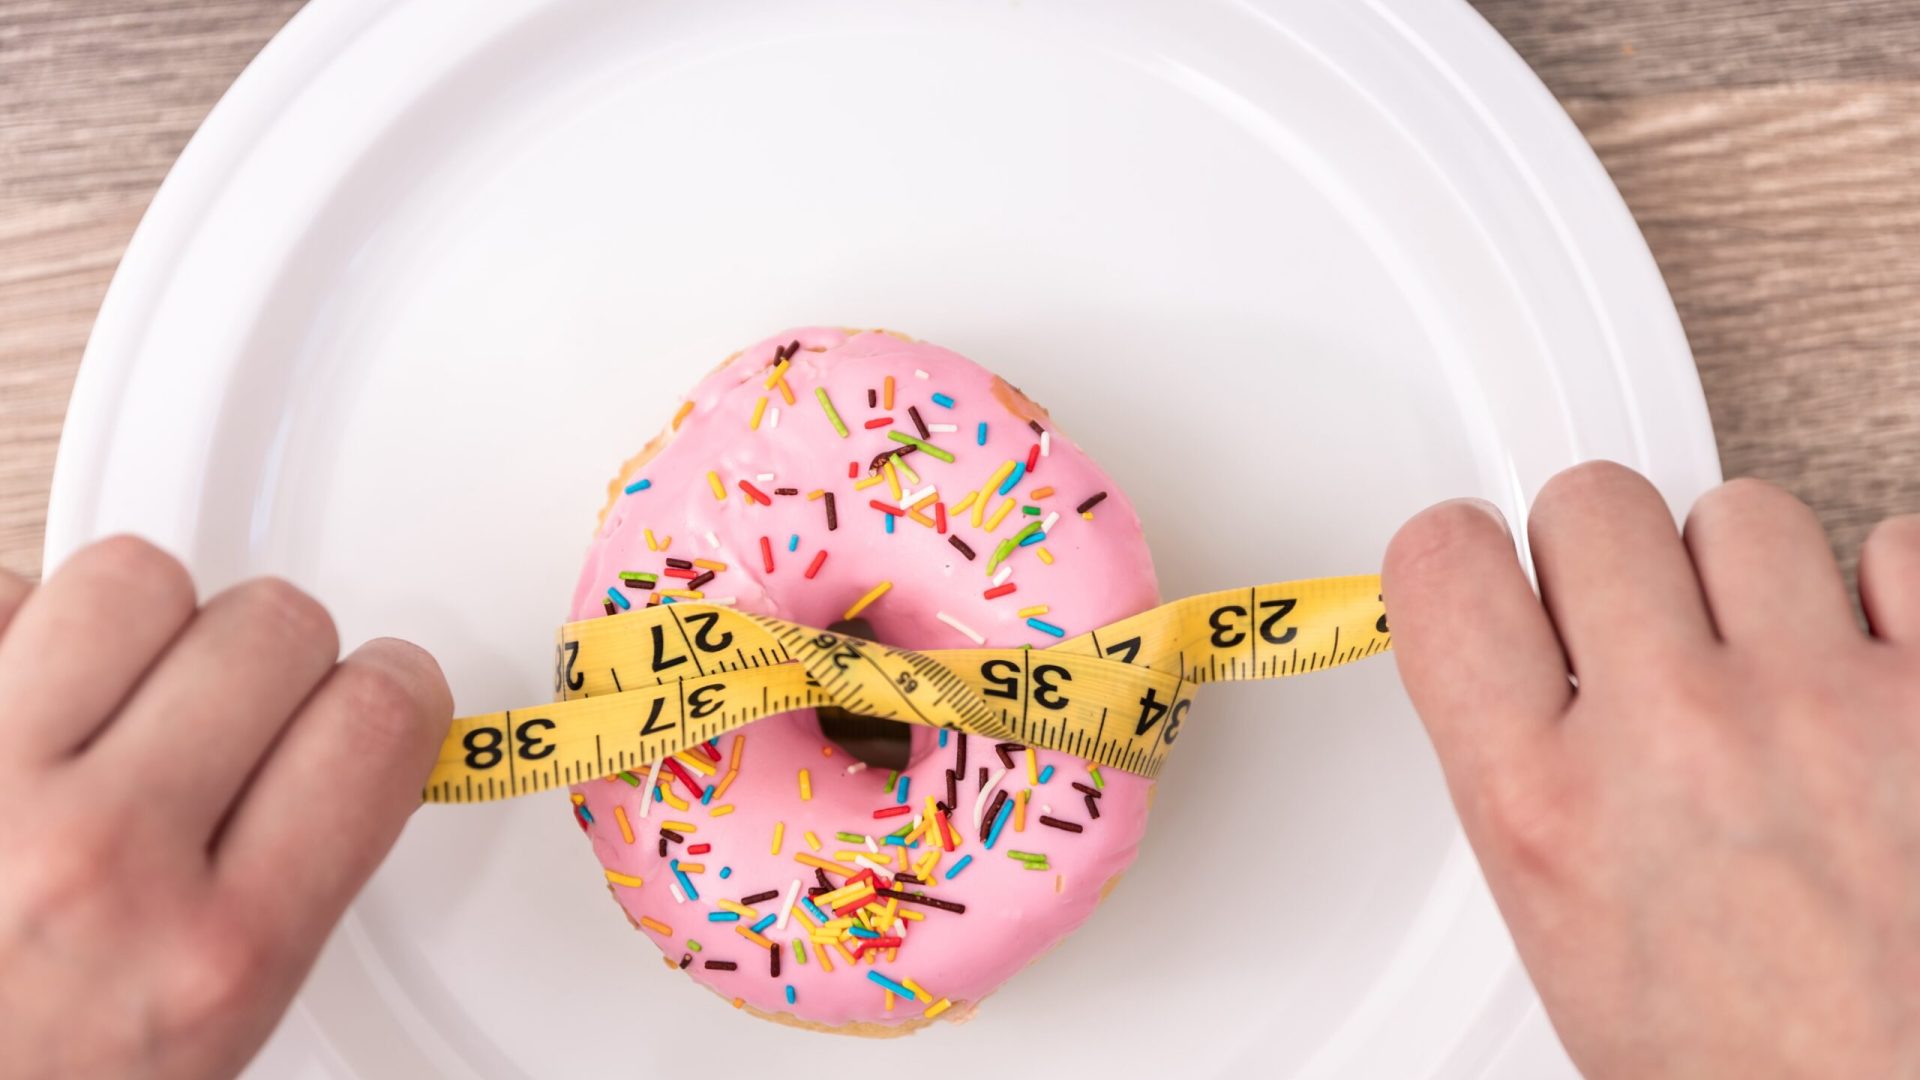 Close up of donut and measuring tape on white background, concept of weight loss, diet, obesity and weight gain.